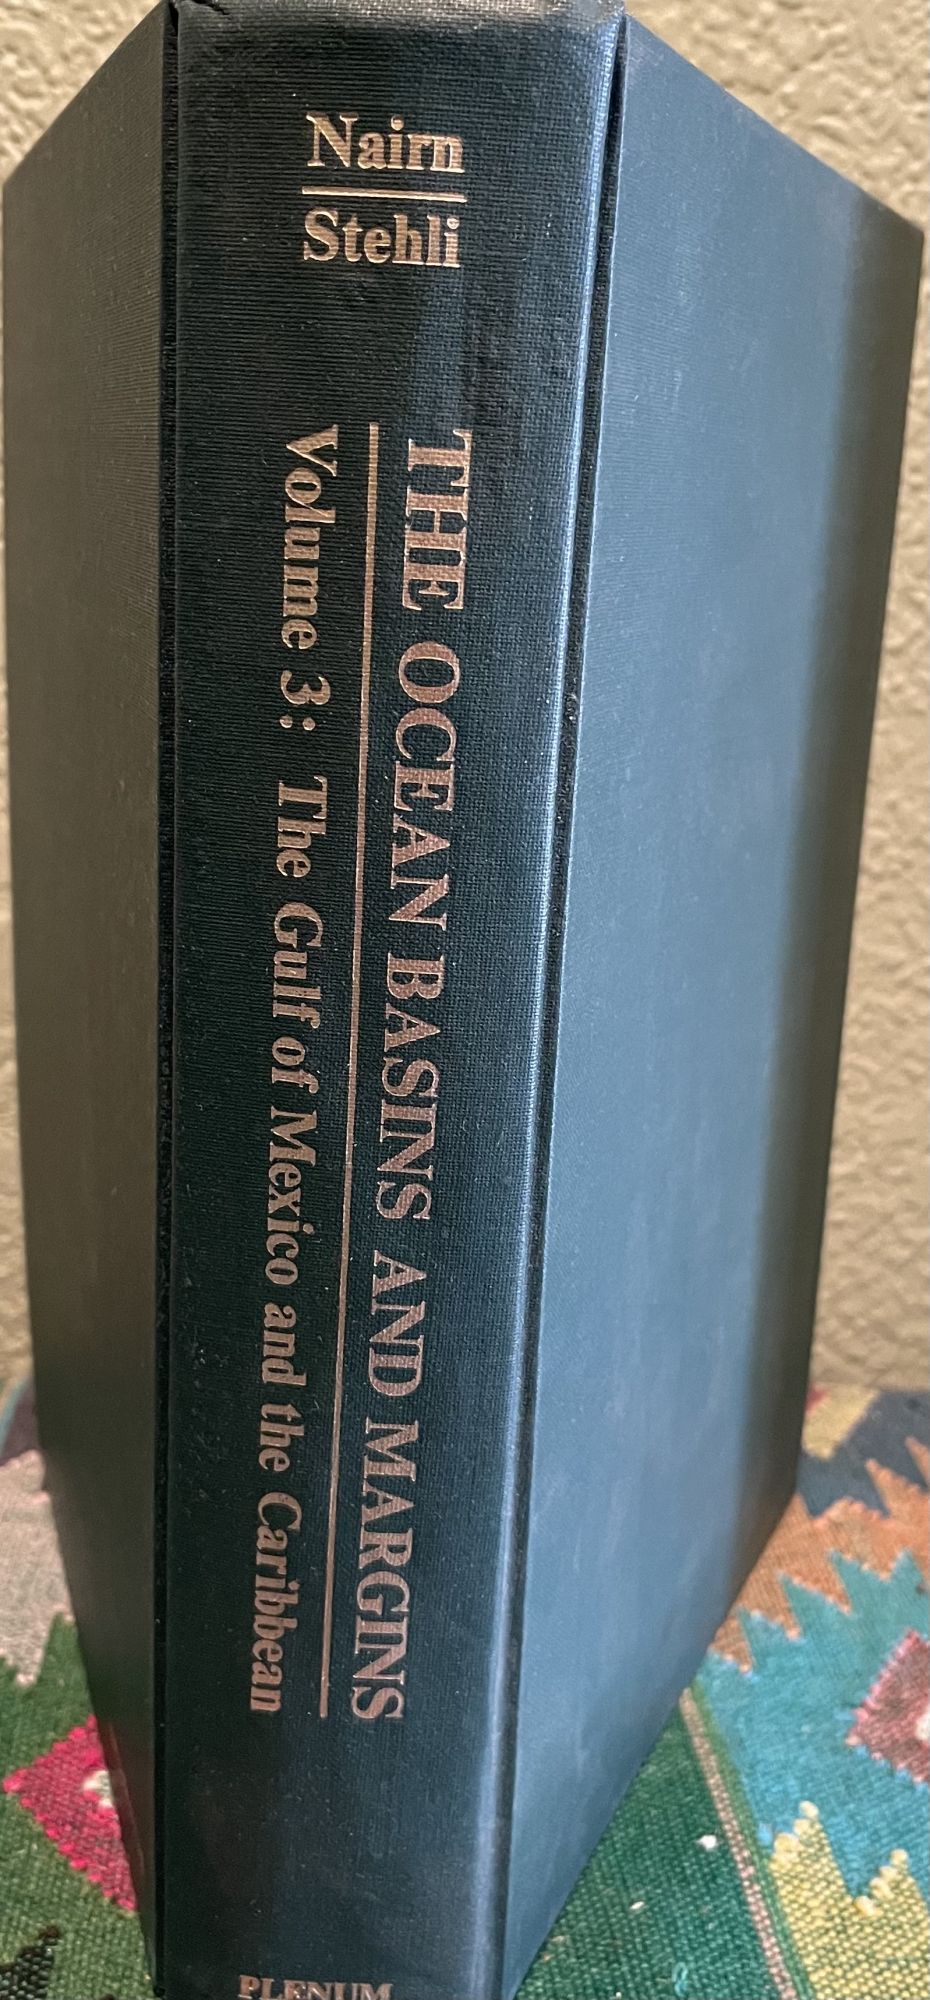 The Ocean Basins and Margins Volume 3 The Gulf of Mexico and the Caribbean. A. E. M. Nairn, F. G. Stehli.